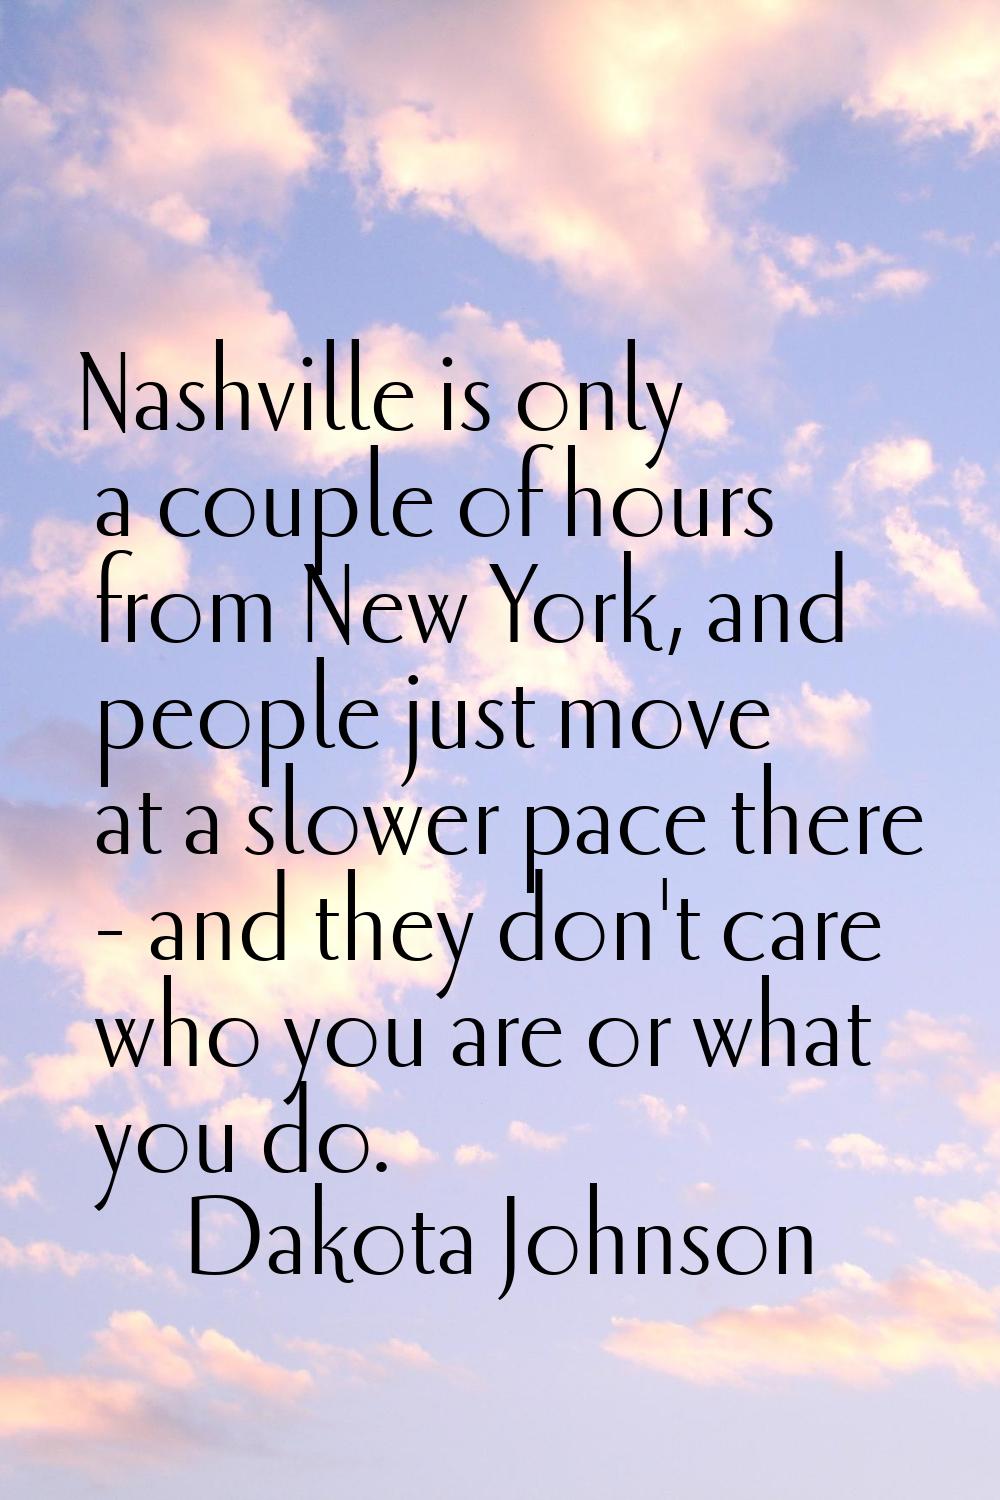 Nashville is only a couple of hours from New York, and people just move at a slower pace there - an